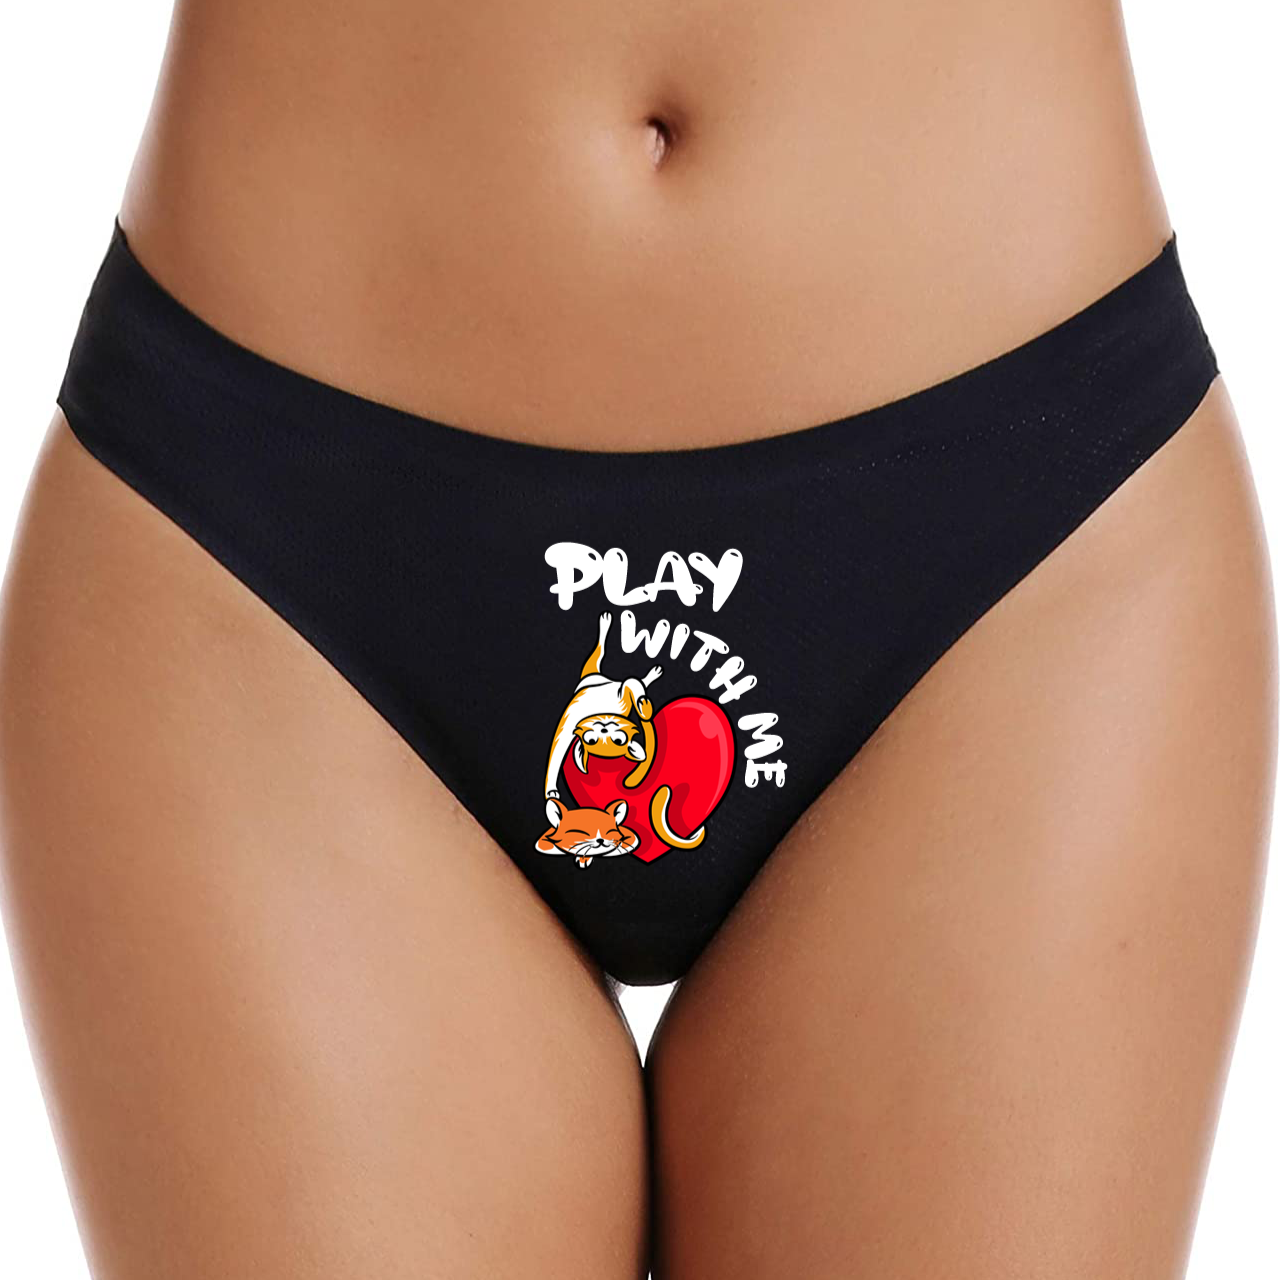 Customizable Play with me Thongs (Black) Add Name or Phrase on the